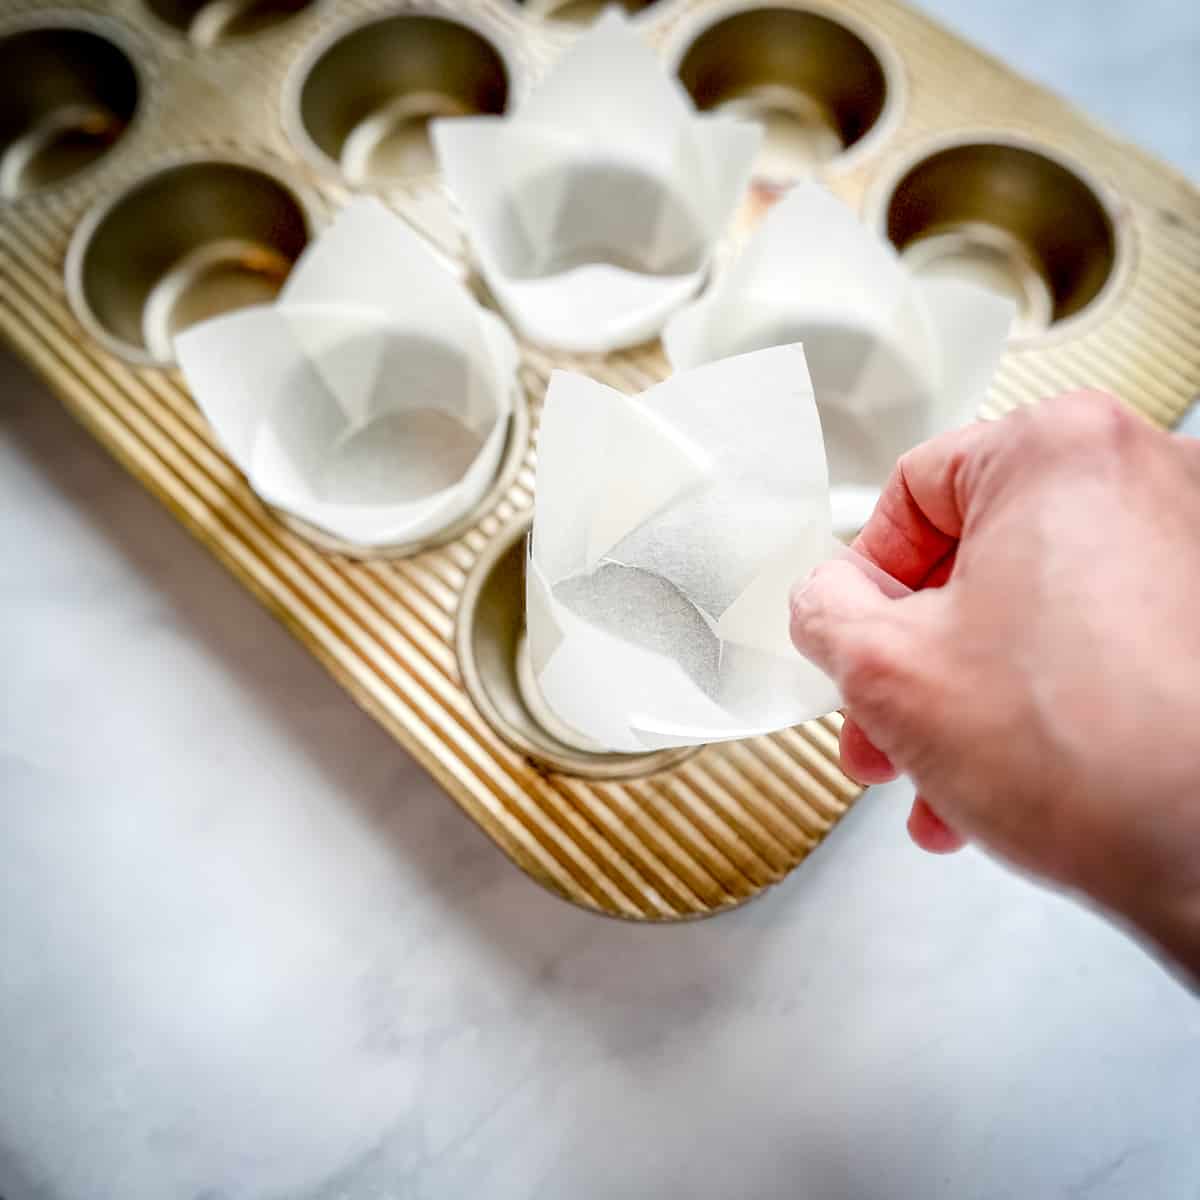 placing jumbo muffin liners into a muffin pan.